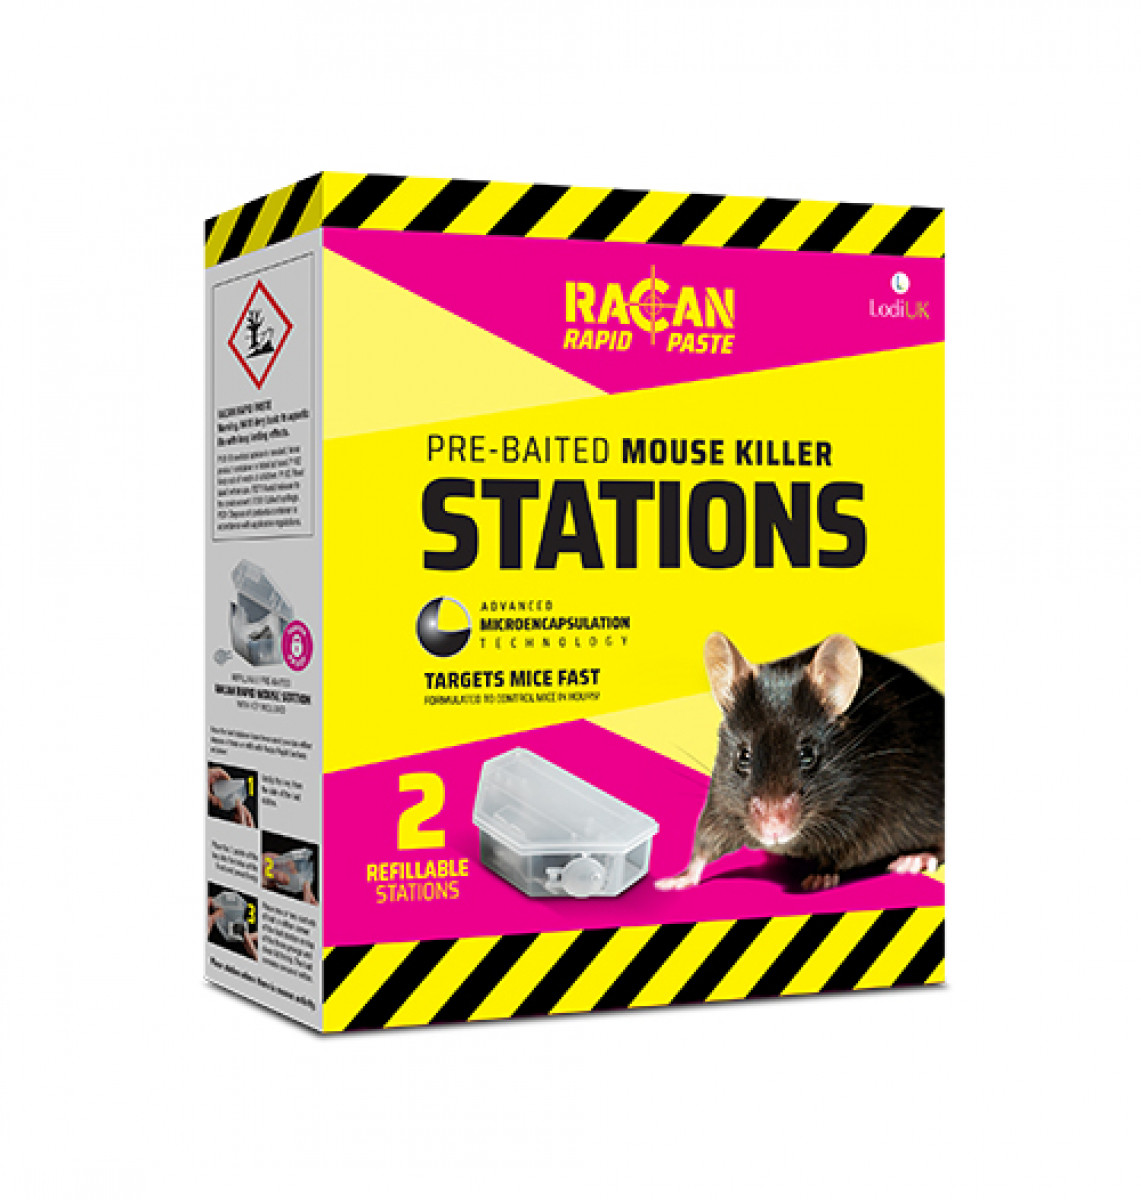 Racan Rapid Mouse Killer Stations